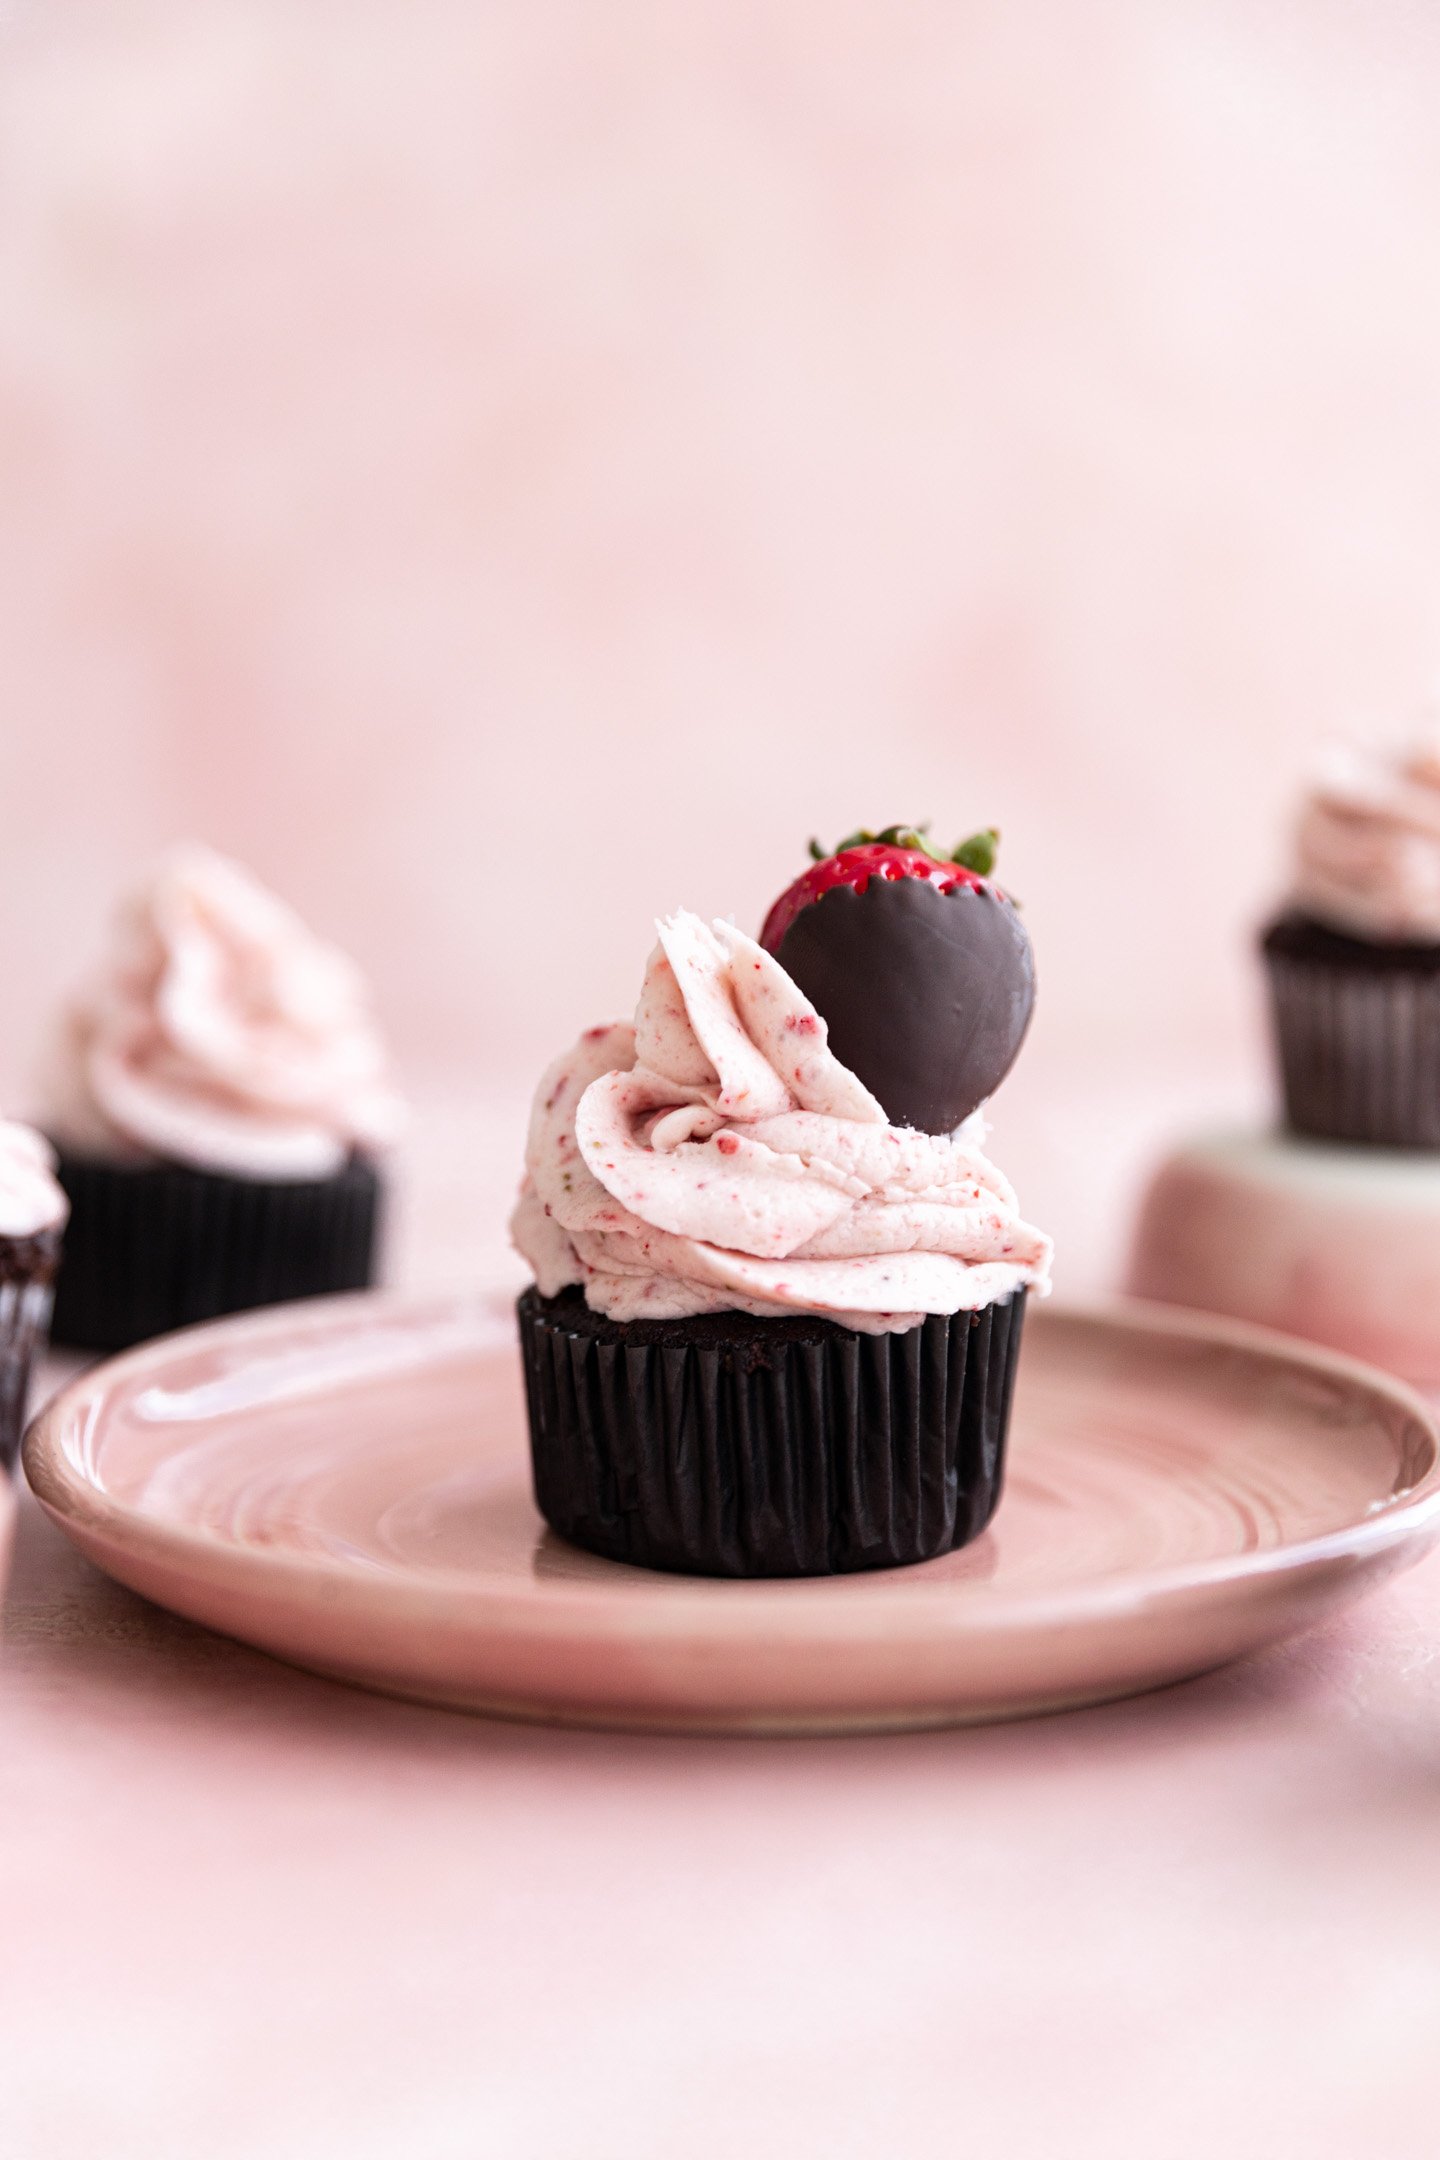 A chocolate strawberry cupcake topped with a chocolate covered strawberry.